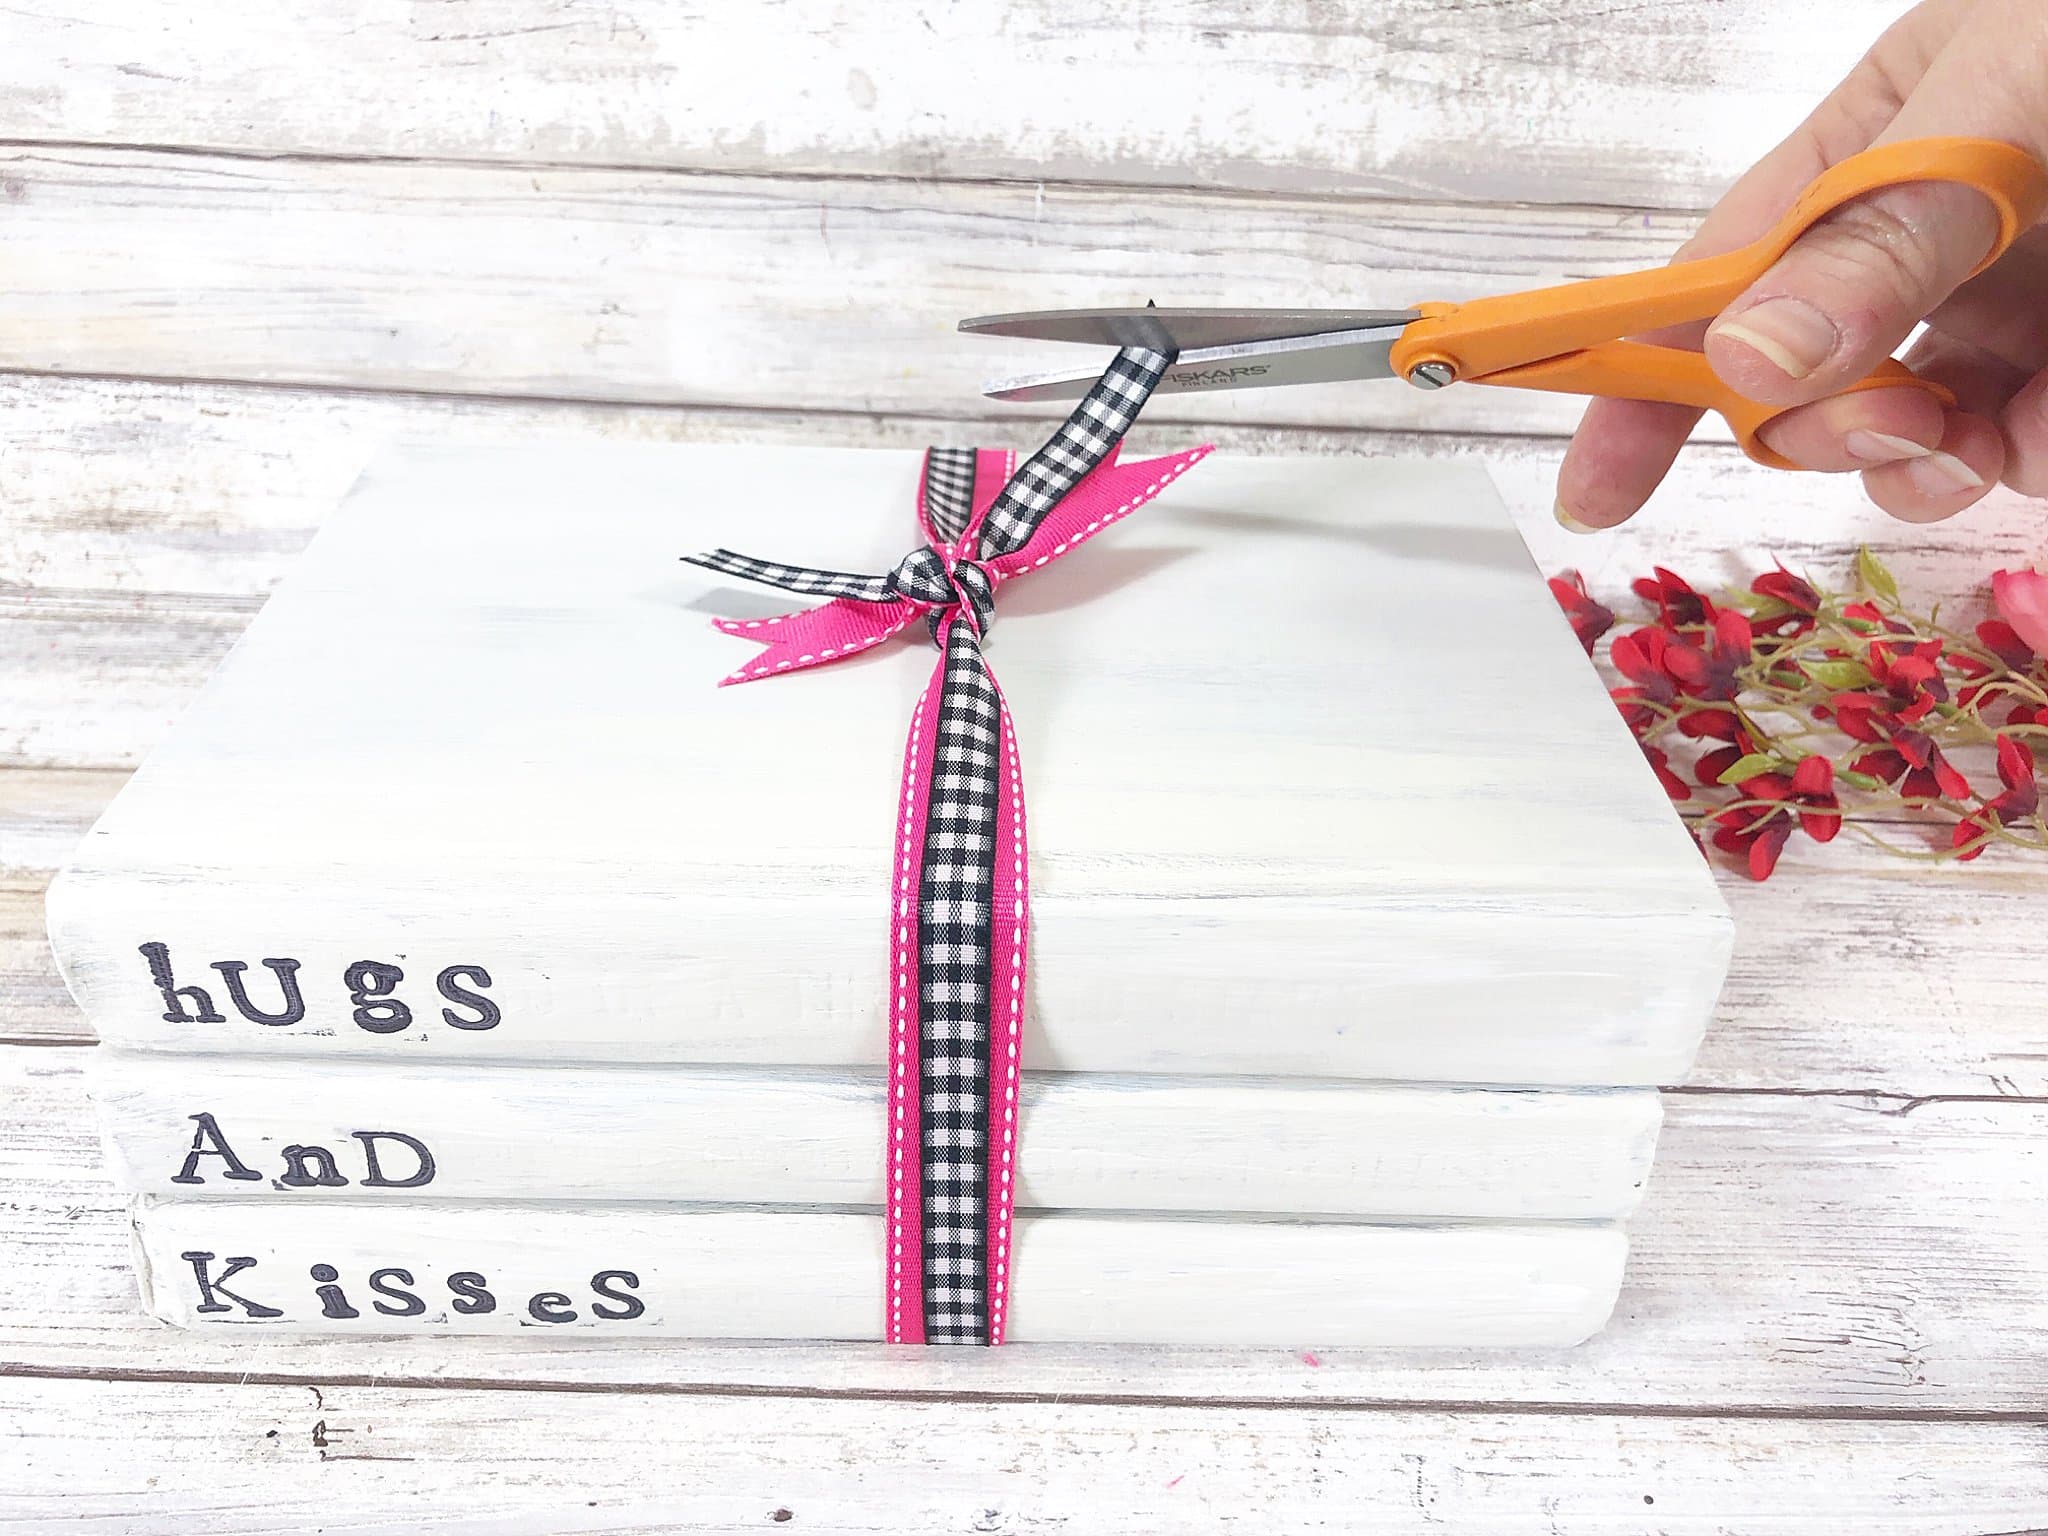 How to Make Farmhouse Book Stacks for Valentine's Day Decor